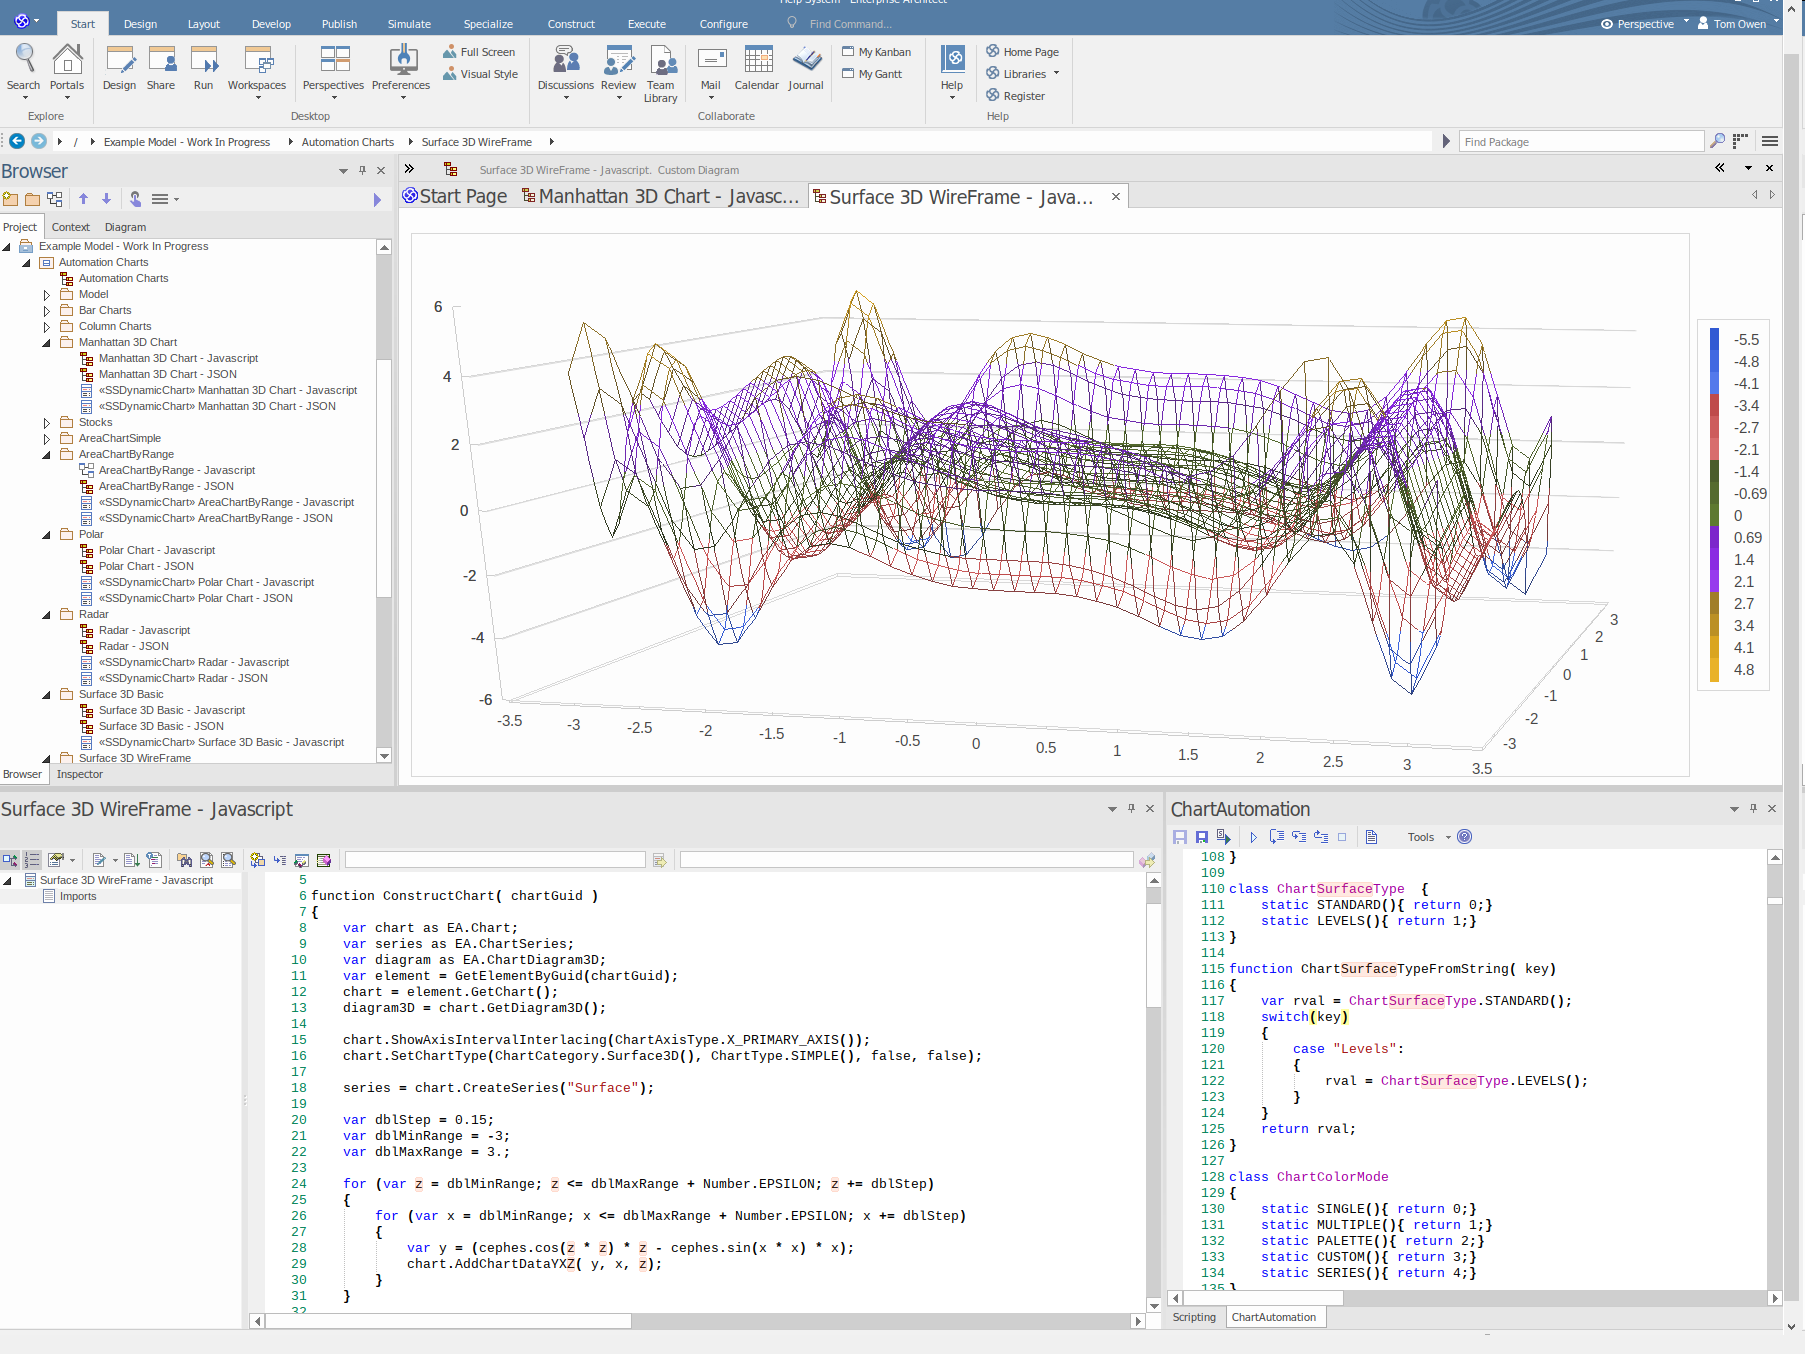 Dynamic charts from scripts and simulations